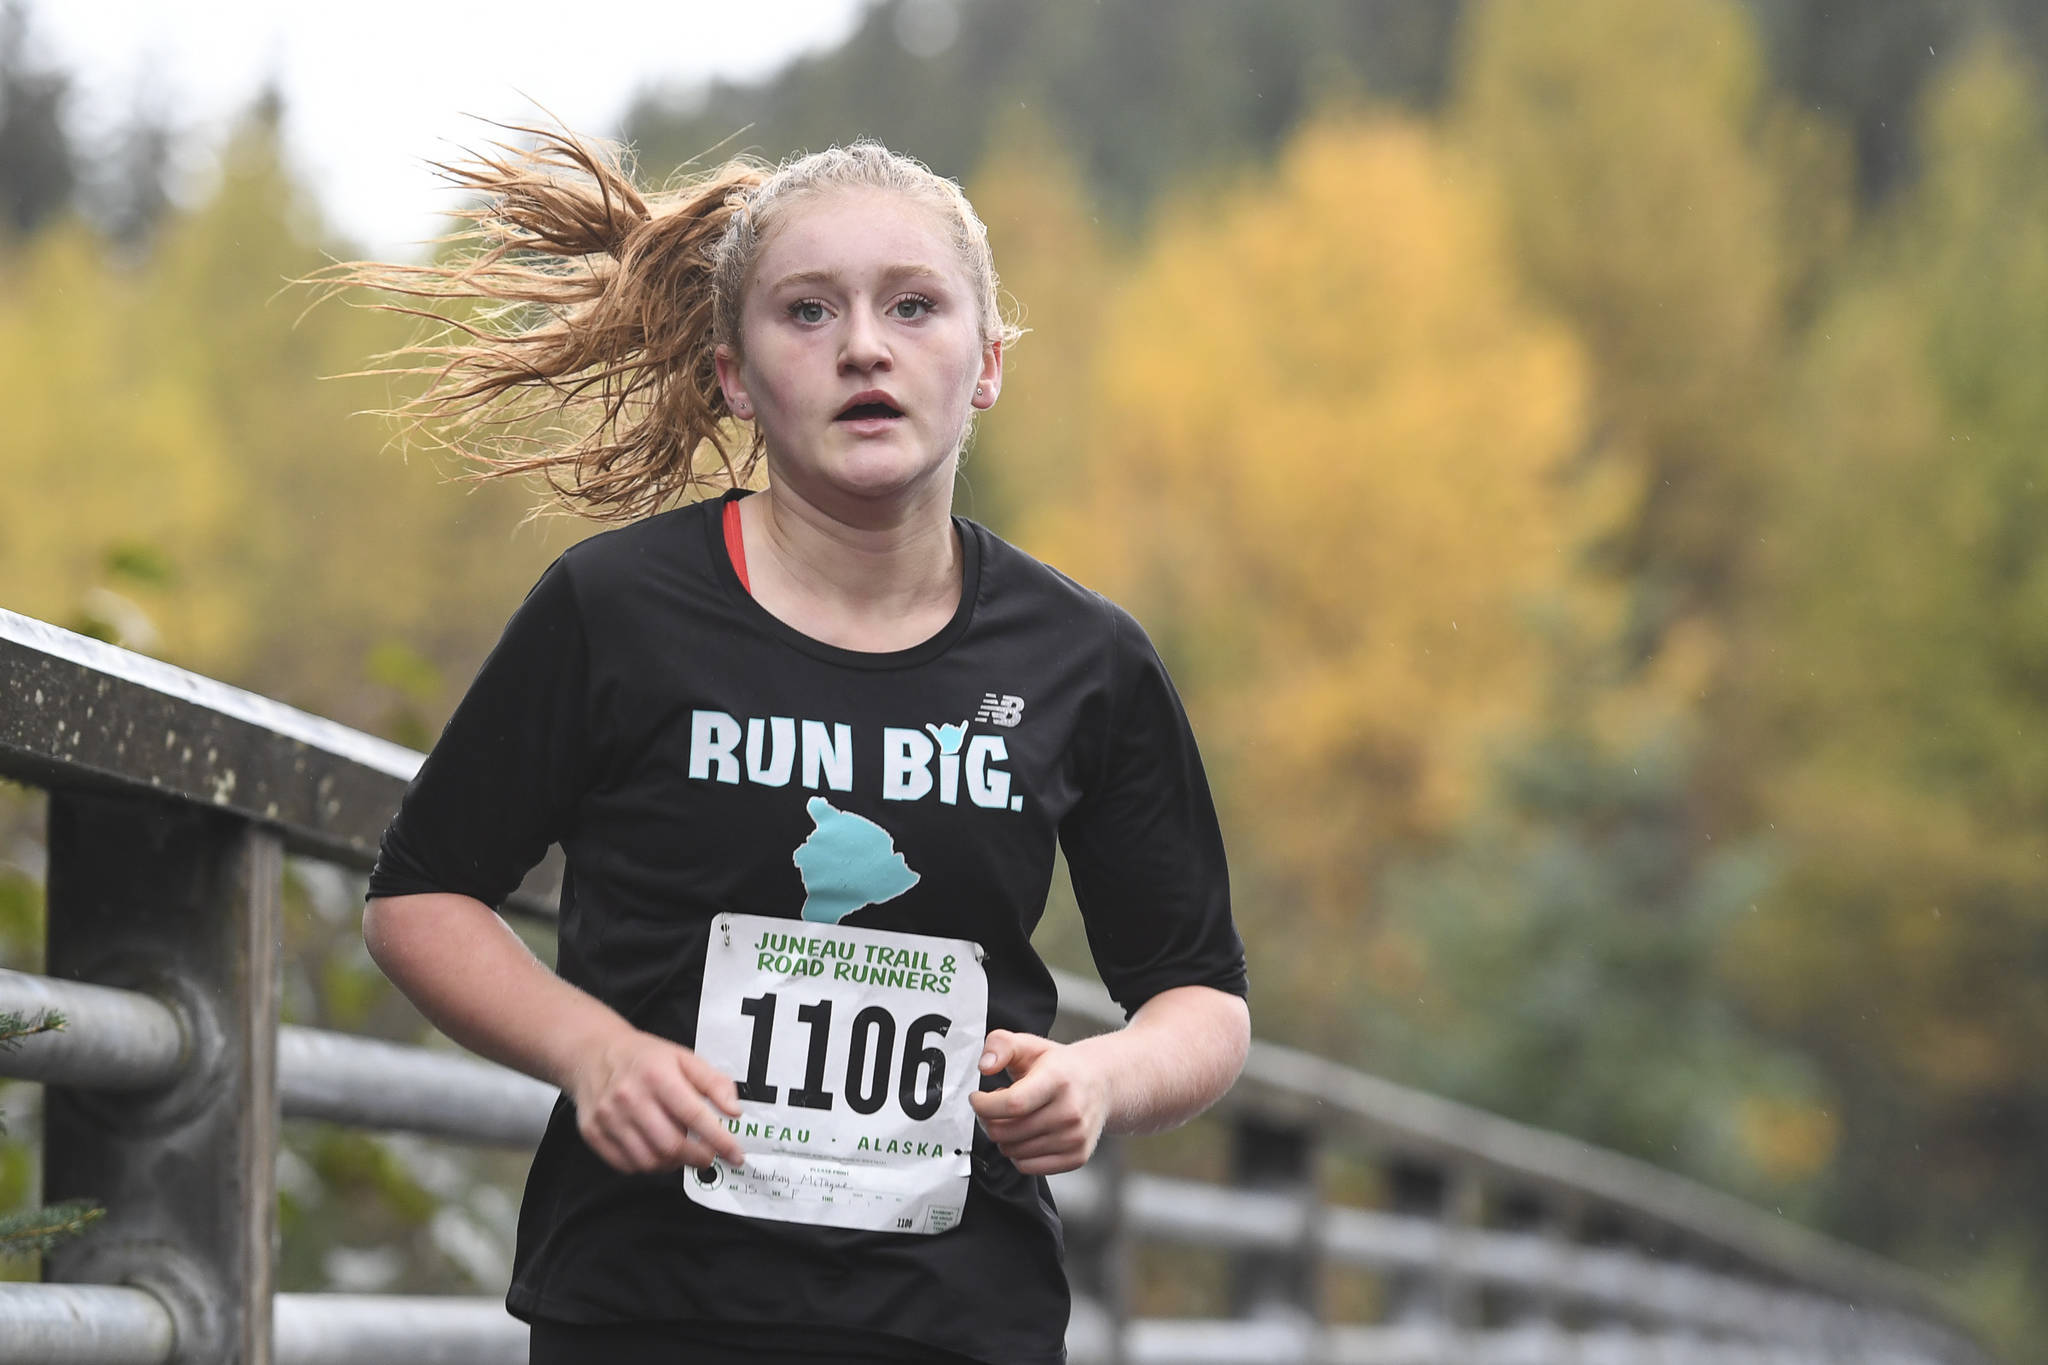 Lindsay McTague participates in the annual community mental health run, the Extra Tough 5K & 1 Mile Run, on Saturday, Oct. 12, 2019, starting at Riverbend Elementary School. The run is sponsored by National Alliance on Mental Illness (NAMI) Juneau. (Michael Penn | Juneau Empire)